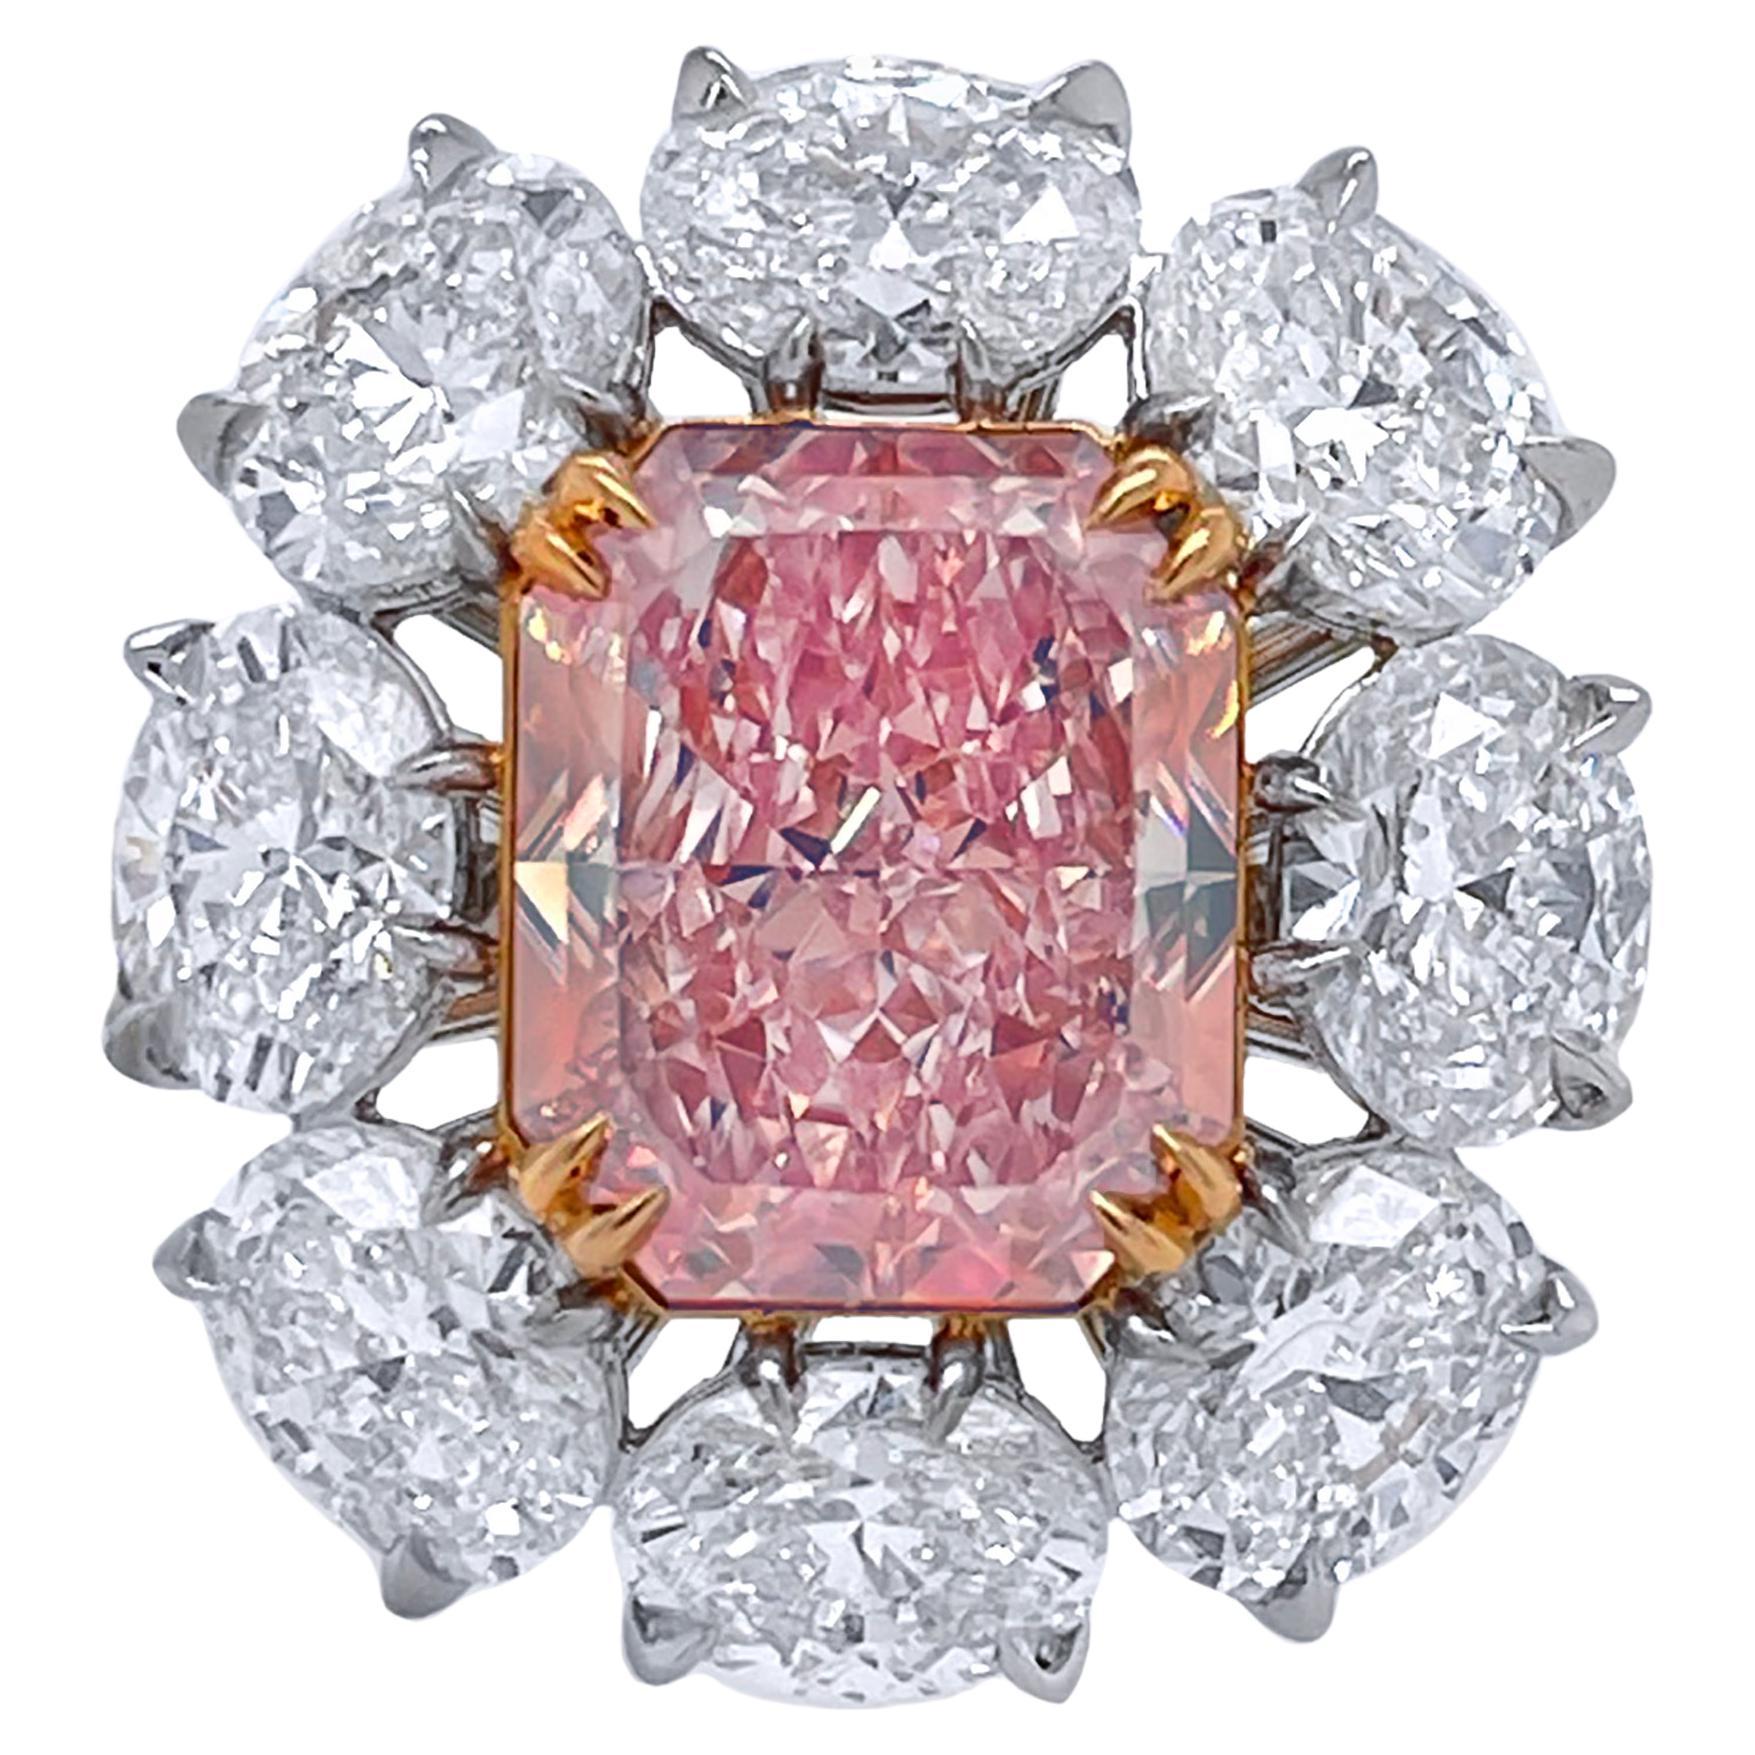 Rare 3.08 Carats Radiant Cut Fancy Pink Flower Diamond Ring GIA Certified  For Sale